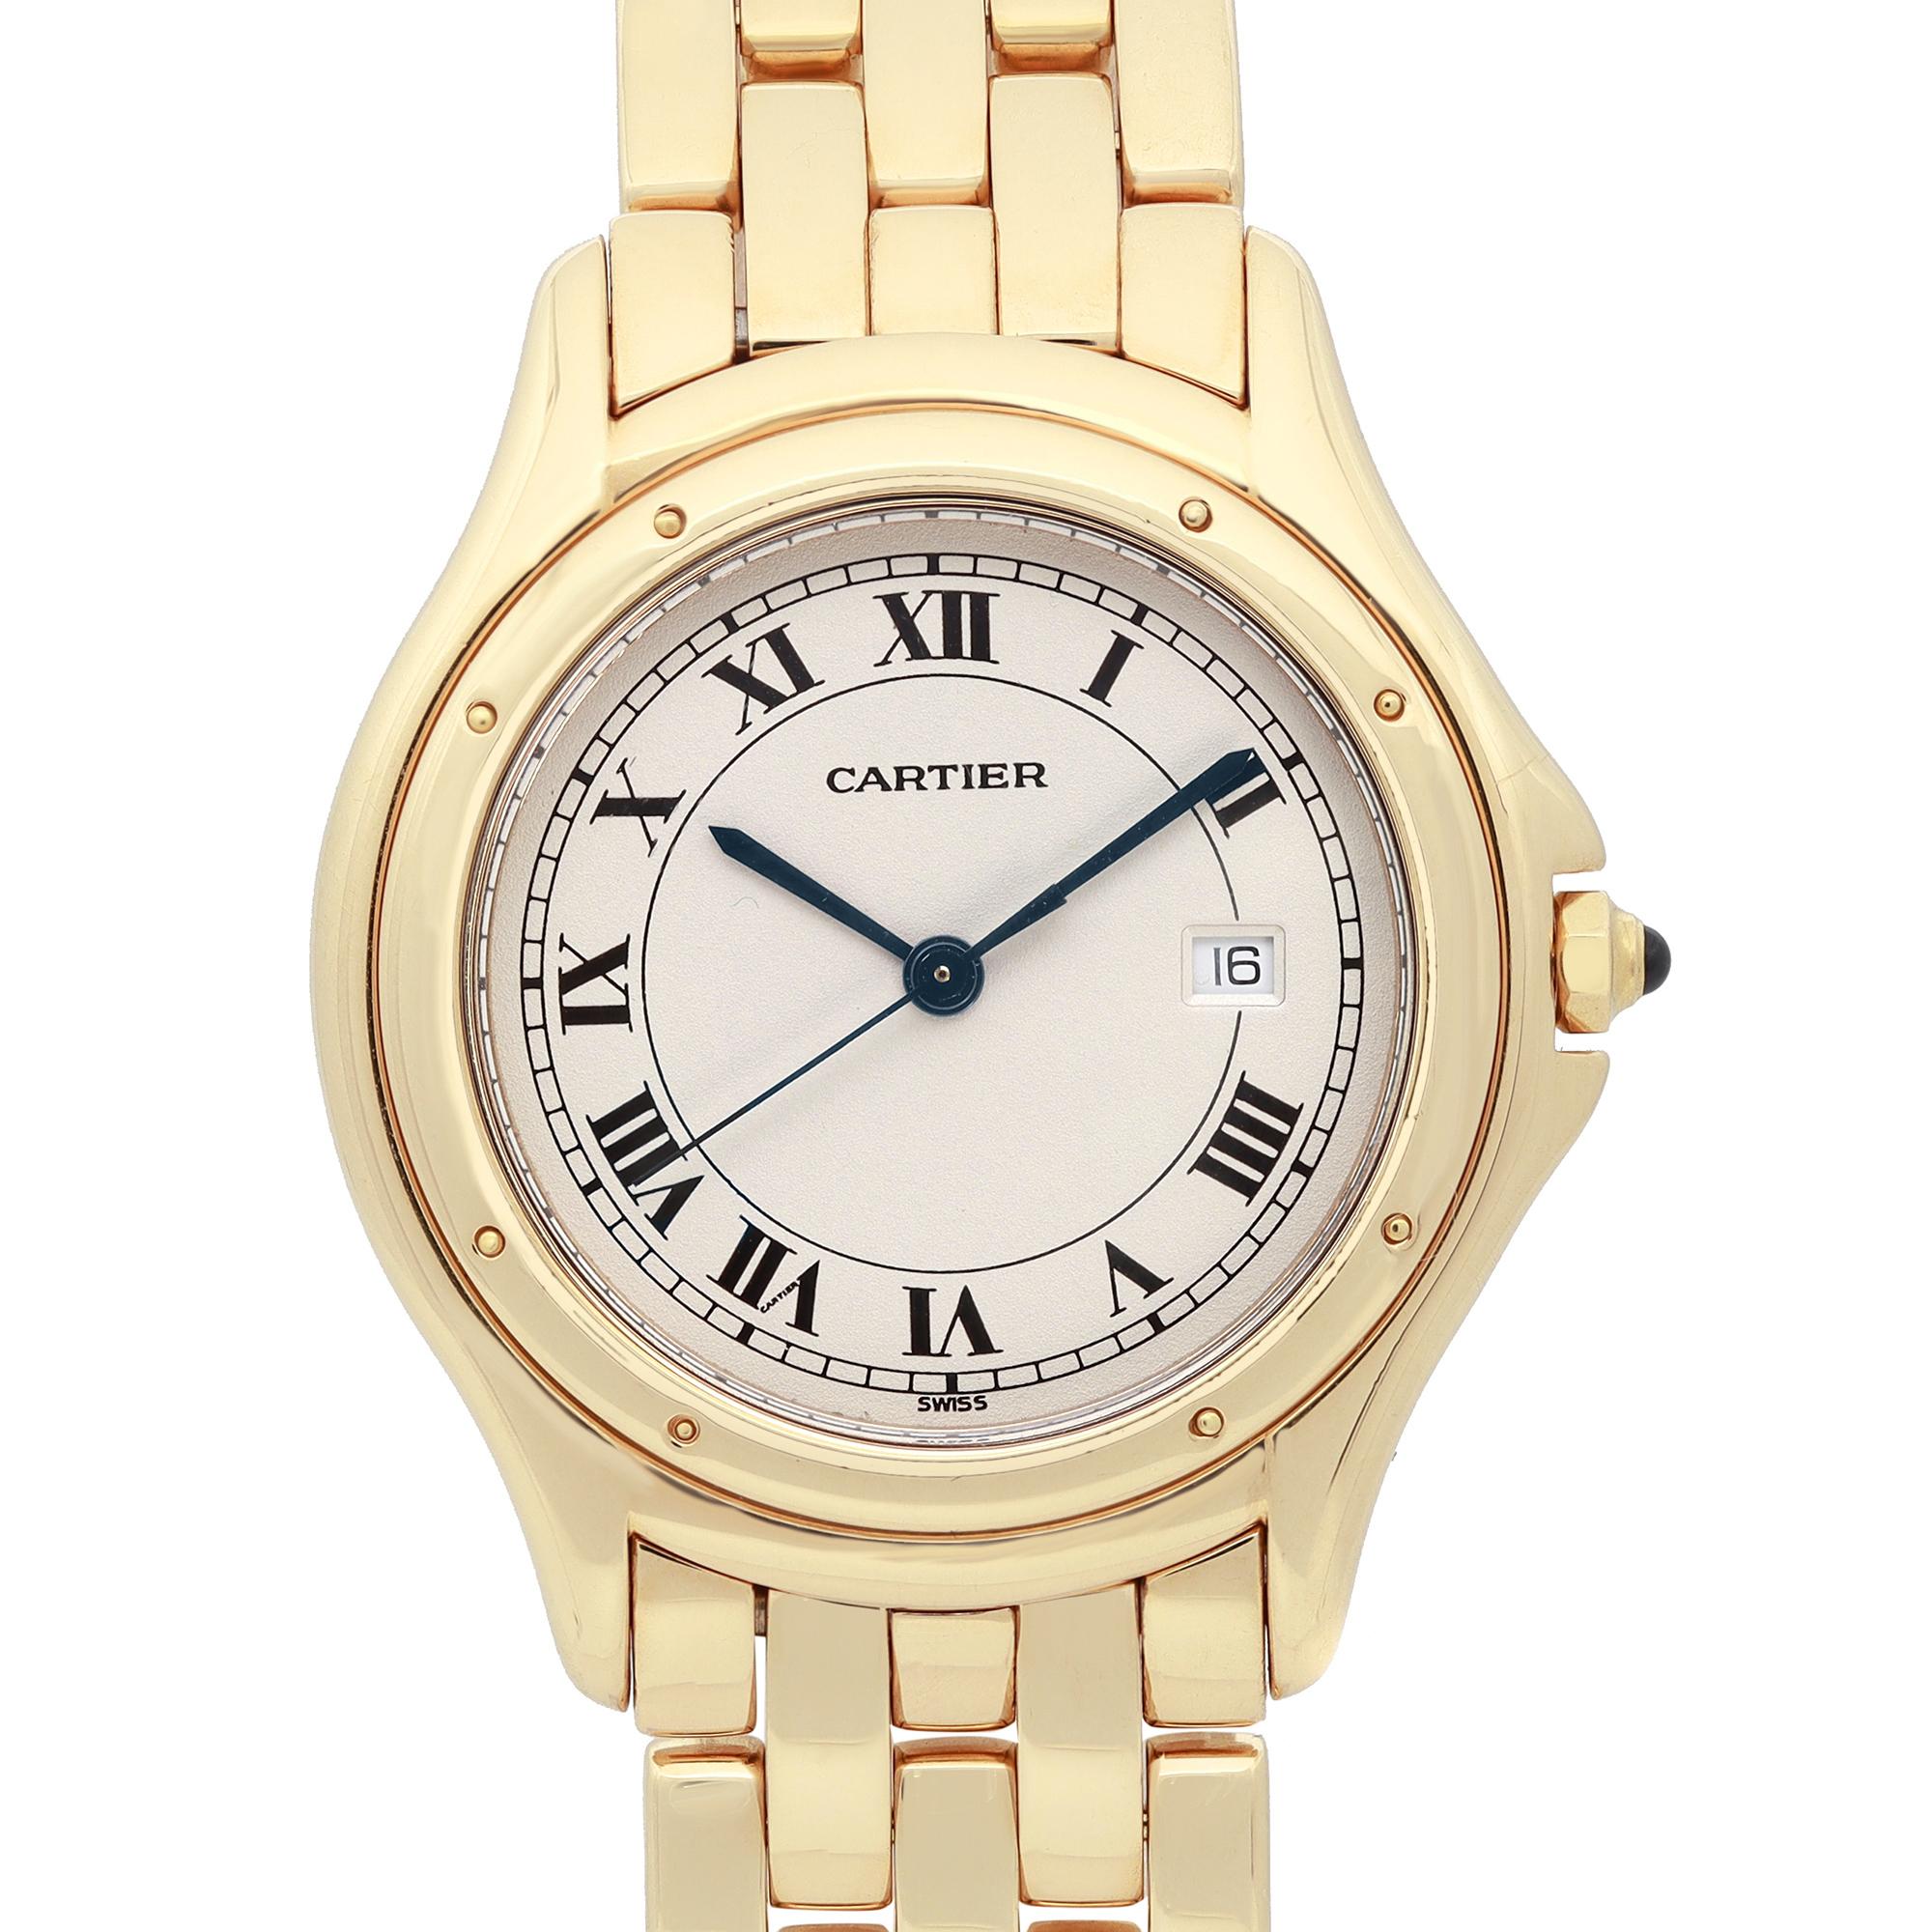 Excellent condition. Comes with only a Box but no papers.

Wrist fit 6.75 Inches

Brand: Cartier  Type: Wristwatch  Department: Women  Model Number: 887904  Country/Region of Manufacture: Switzerland  Style: Luxury  Model: Cartier Cougar Panthere 